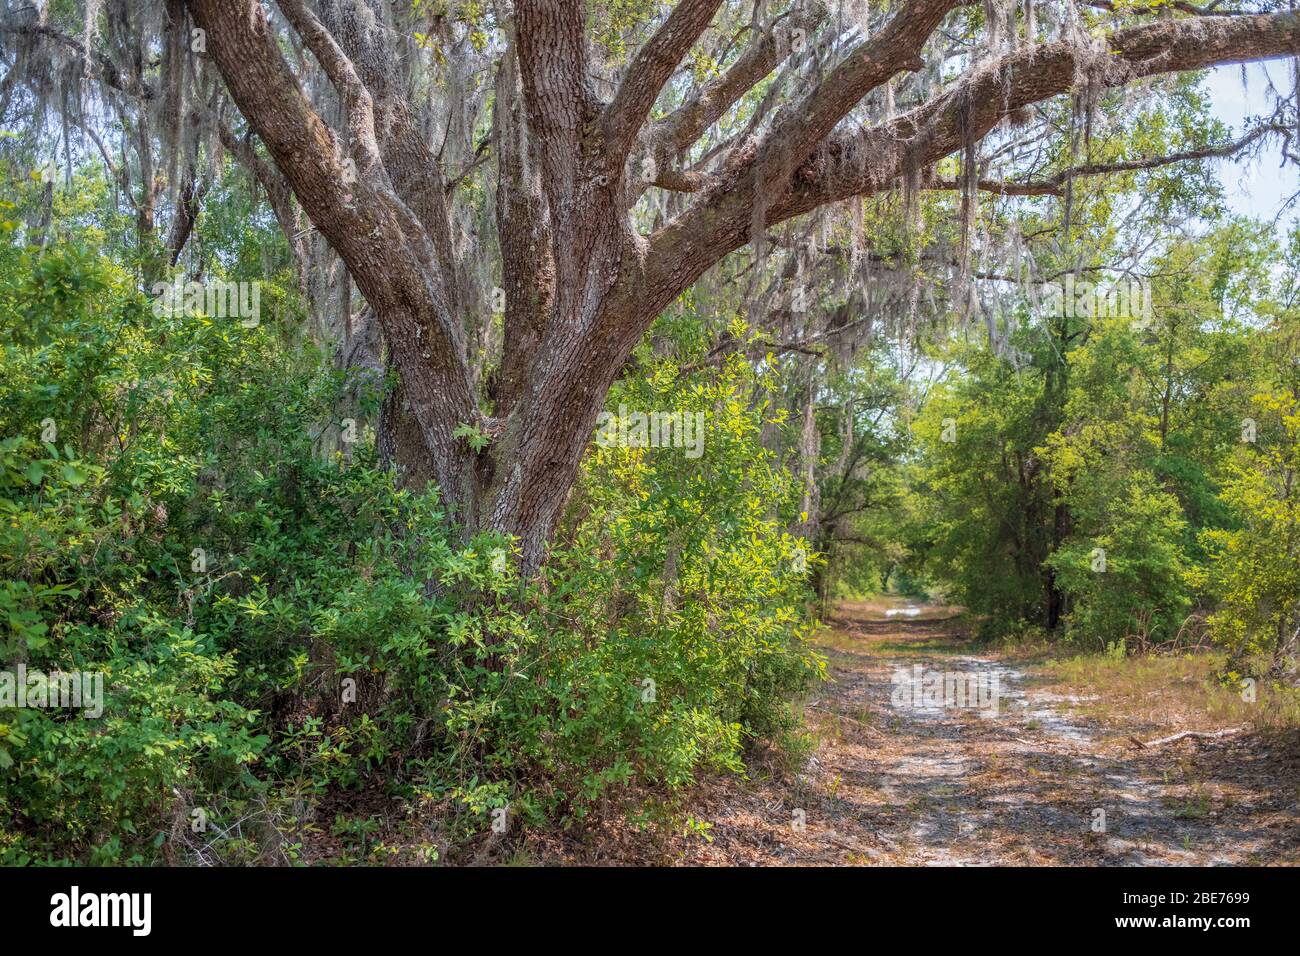 Live oak tree drapped in Spanish Moss along dirt road in forested area. Tropical Halpata Tastanaki Preserve. Dunnellon, Florida. Stock Photo